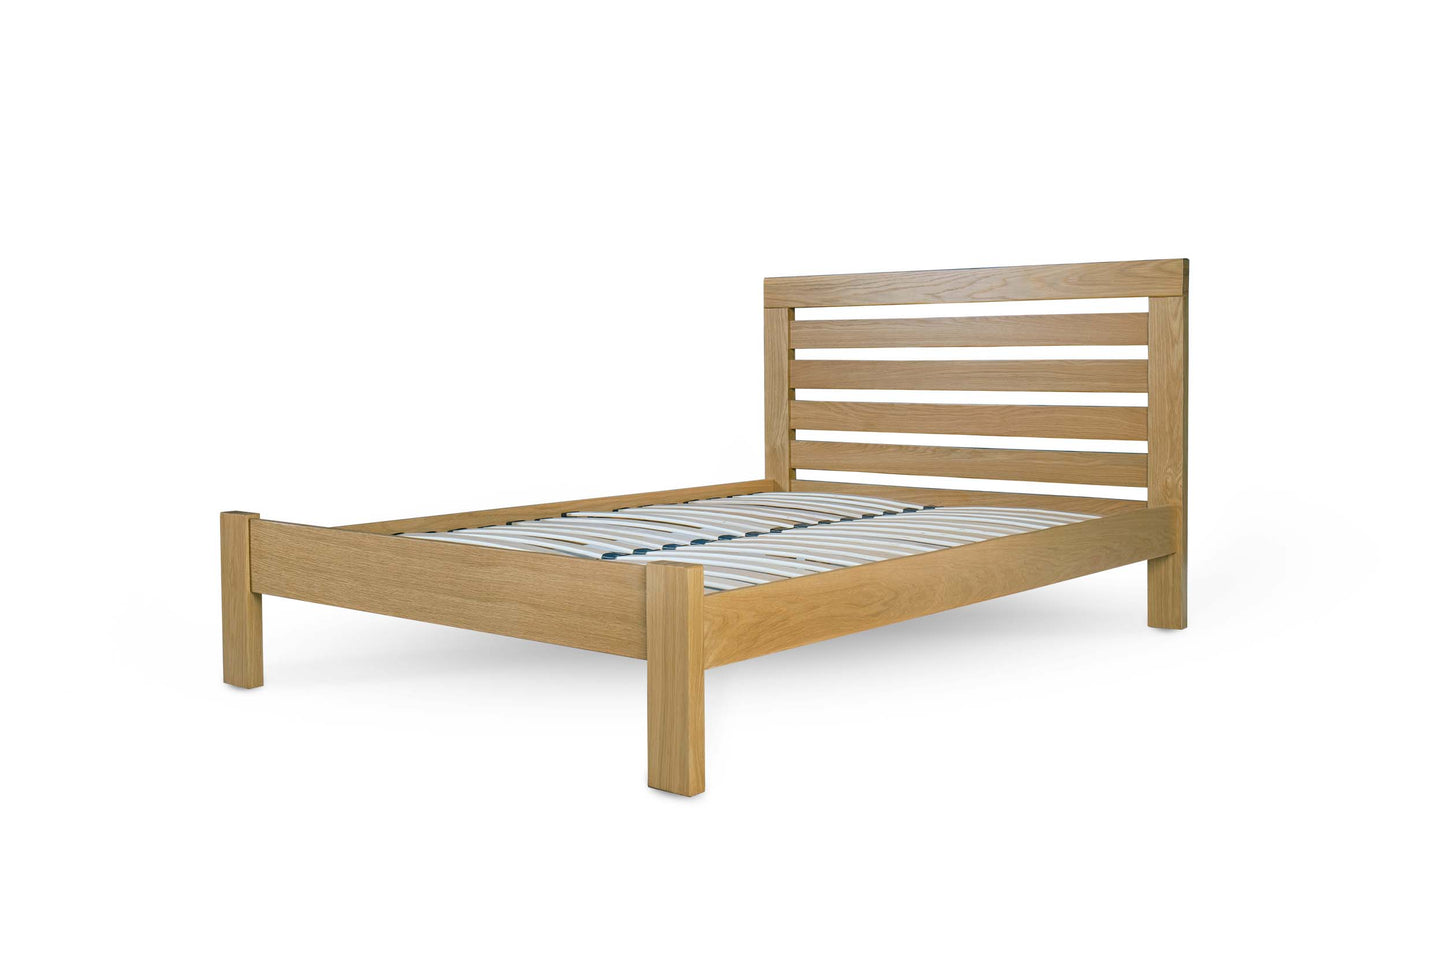 Wingfield Bed Frame - 4ft Small Double - Natural Oak